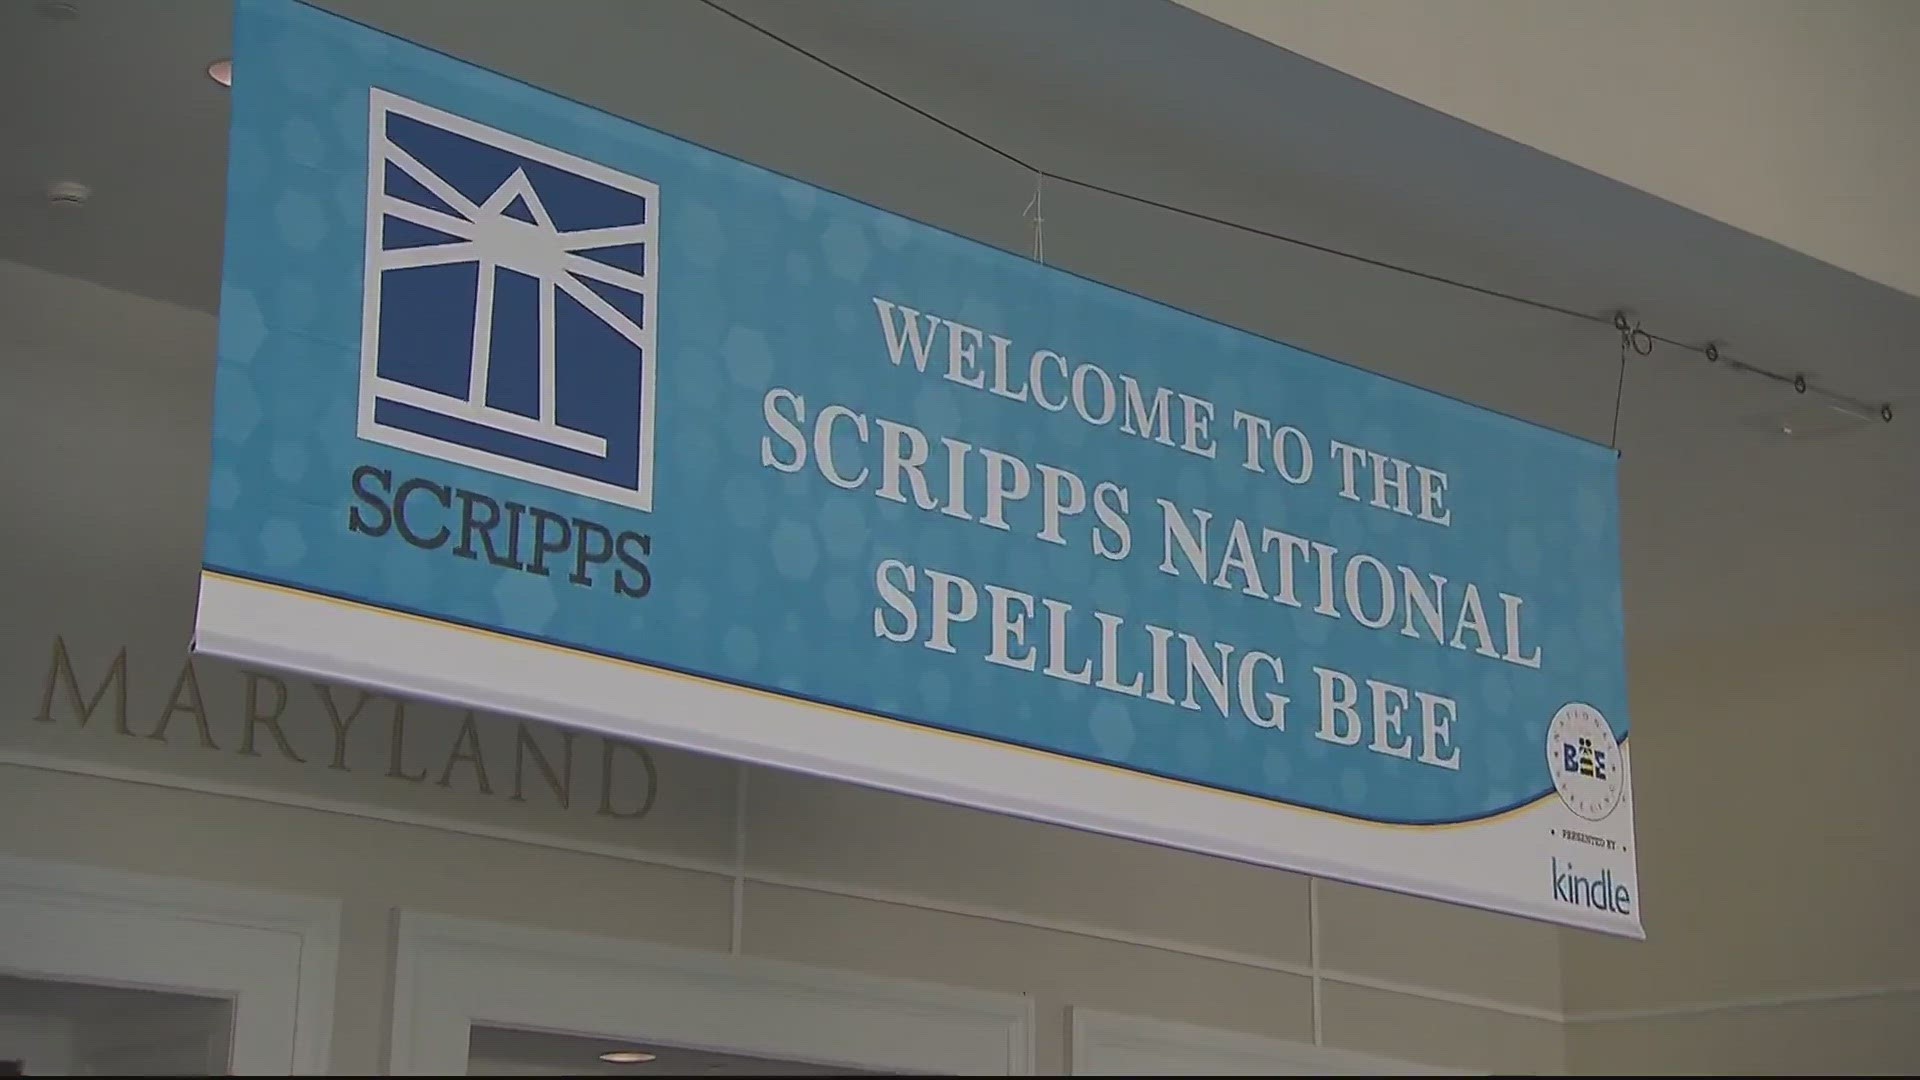 The preliminaries of the Scripps National Spelling Bee get underway in less than 3 hours at National Harbor.